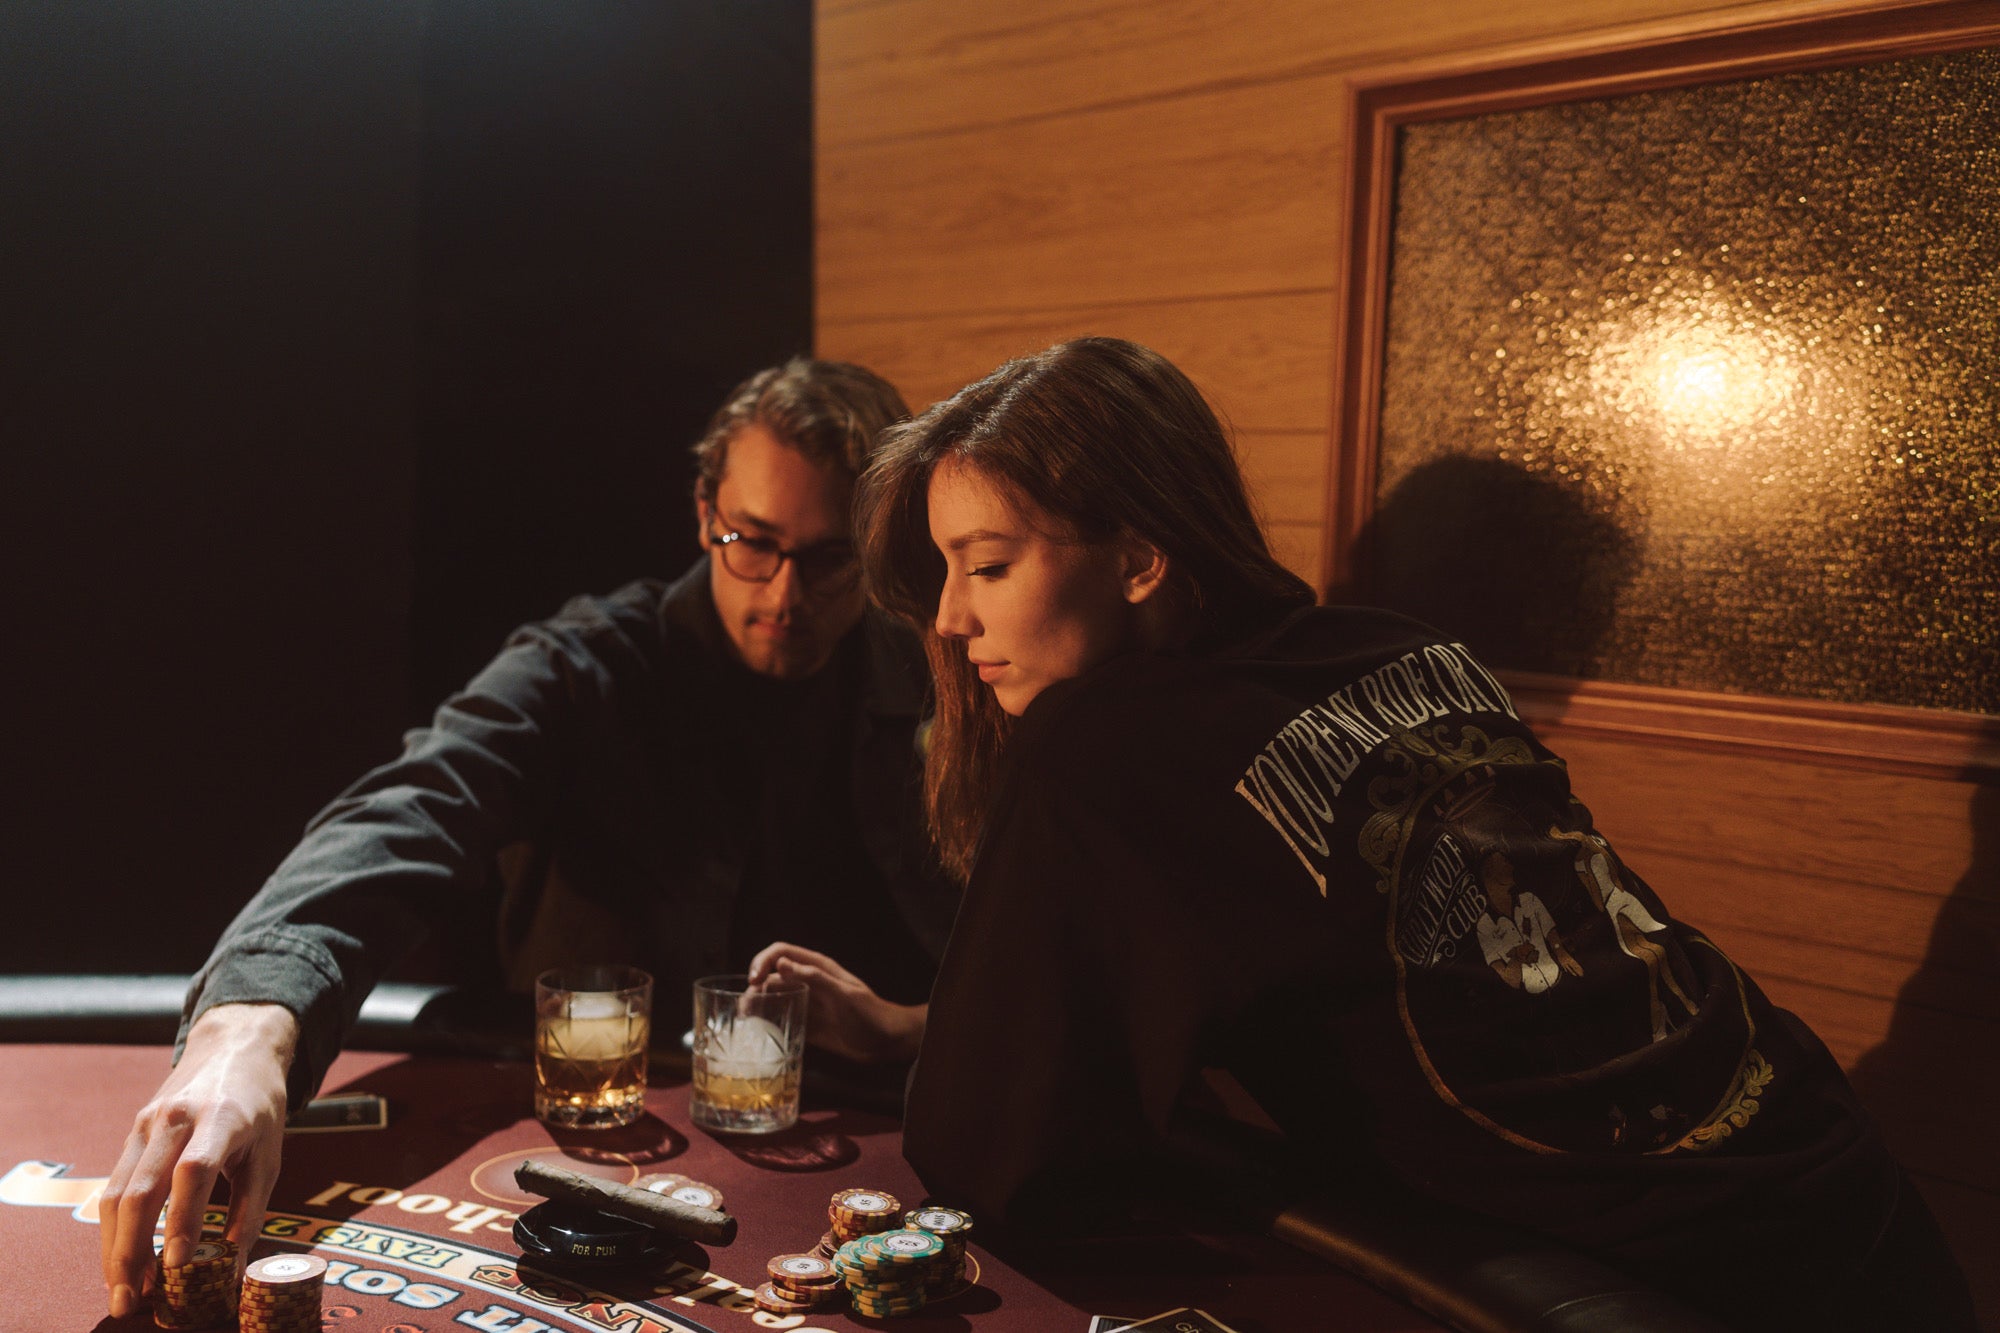 Man and woman sitting in a booth in a dark room playing poker on a poker table and drinking whiskey from two glasses